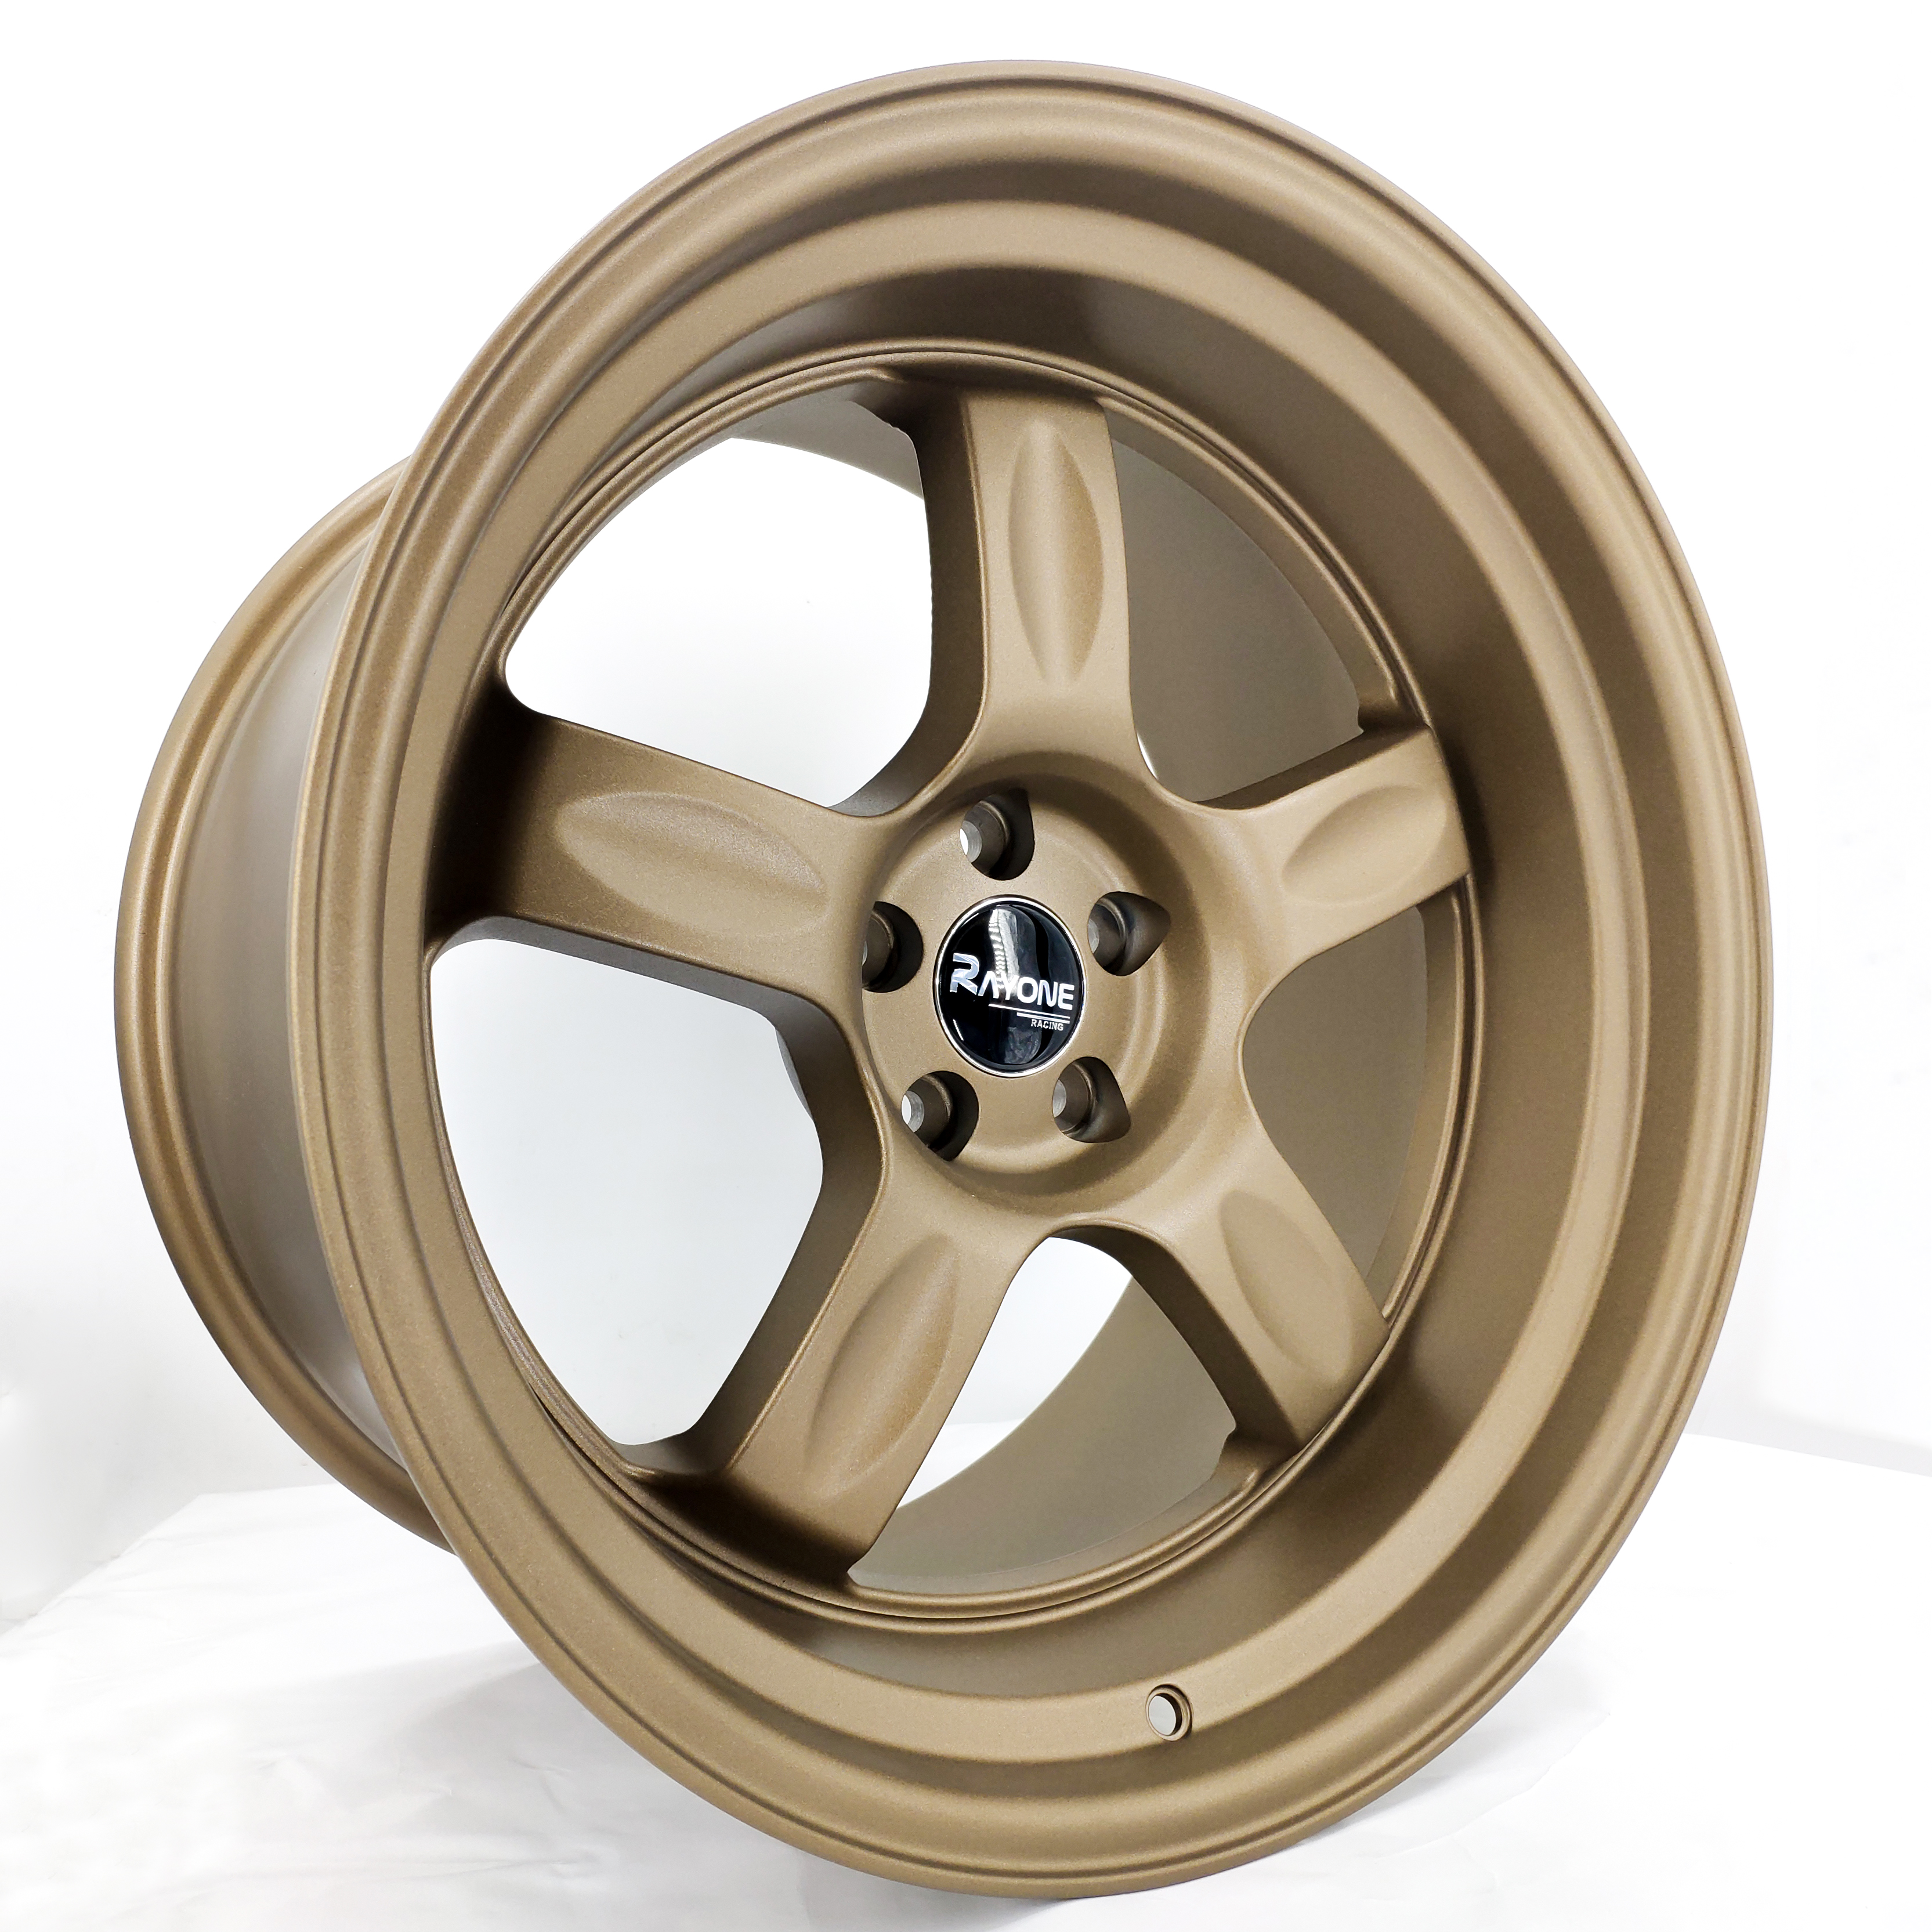 Wholesale Discount Alloy Wheels With Tyres - Rayone’s New Design 17/18inch 5 Spoke Aftermarket Rims – Rayone